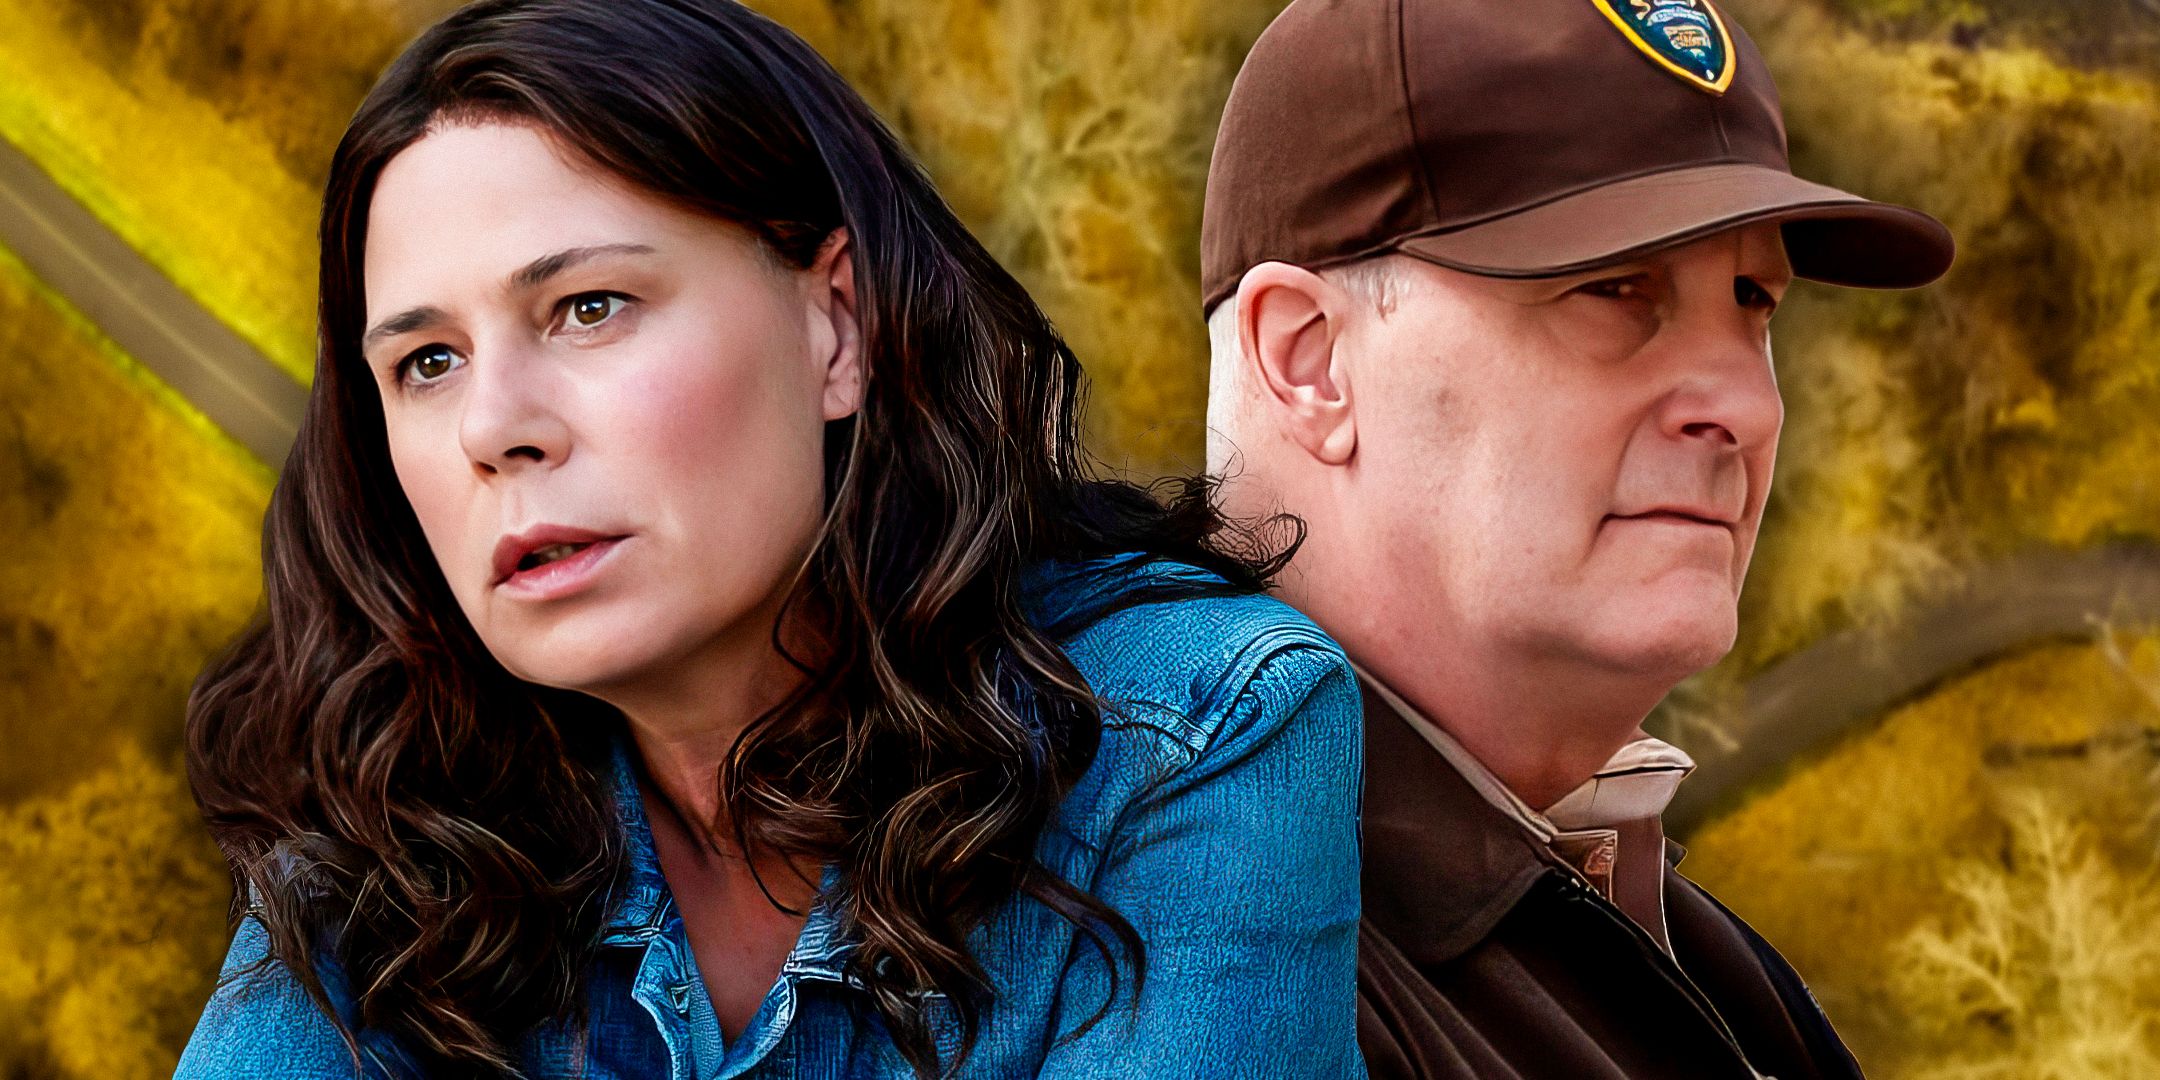 Maura Tierney as Grace Poe and Jeff Daniels as Chief Del Harris in American Rust.